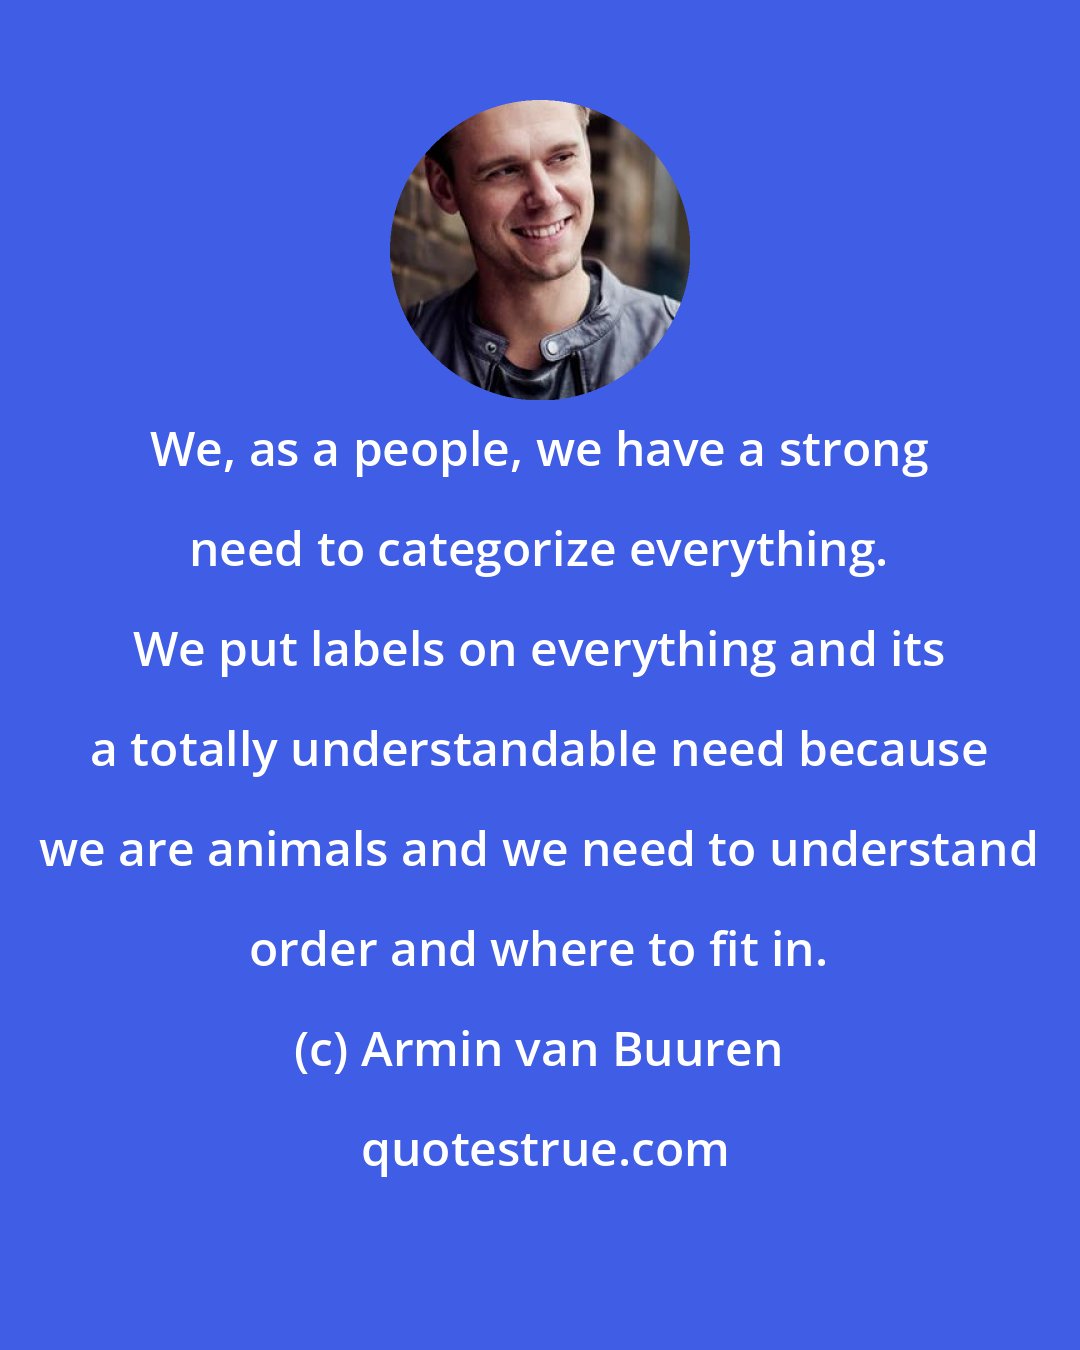 Armin van Buuren: We, as a people, we have a strong need to categorize everything. We put labels on everything and its a totally understandable need because we are animals and we need to understand order and where to fit in.